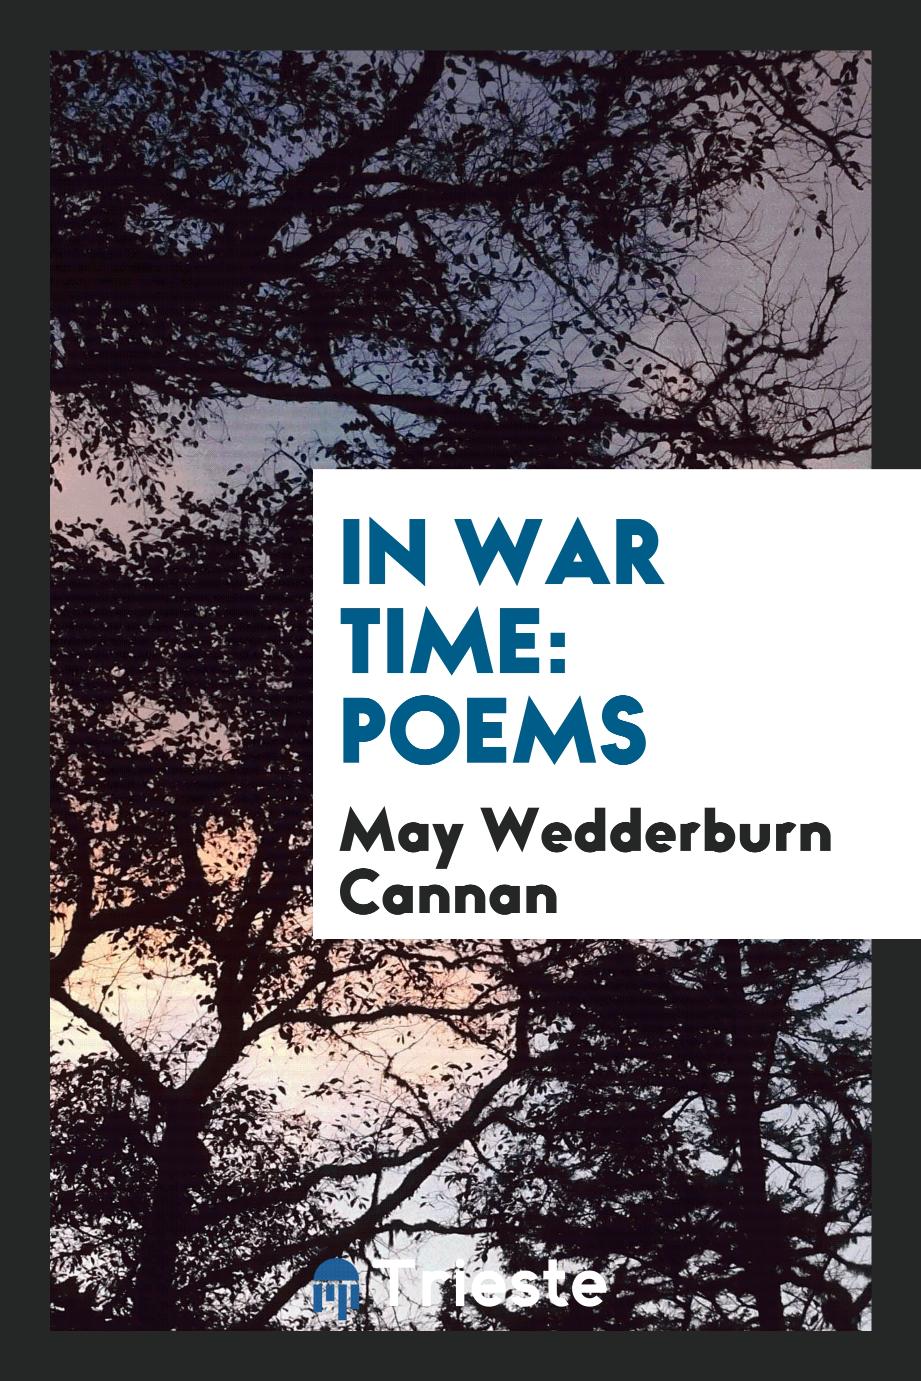 In war time: poems